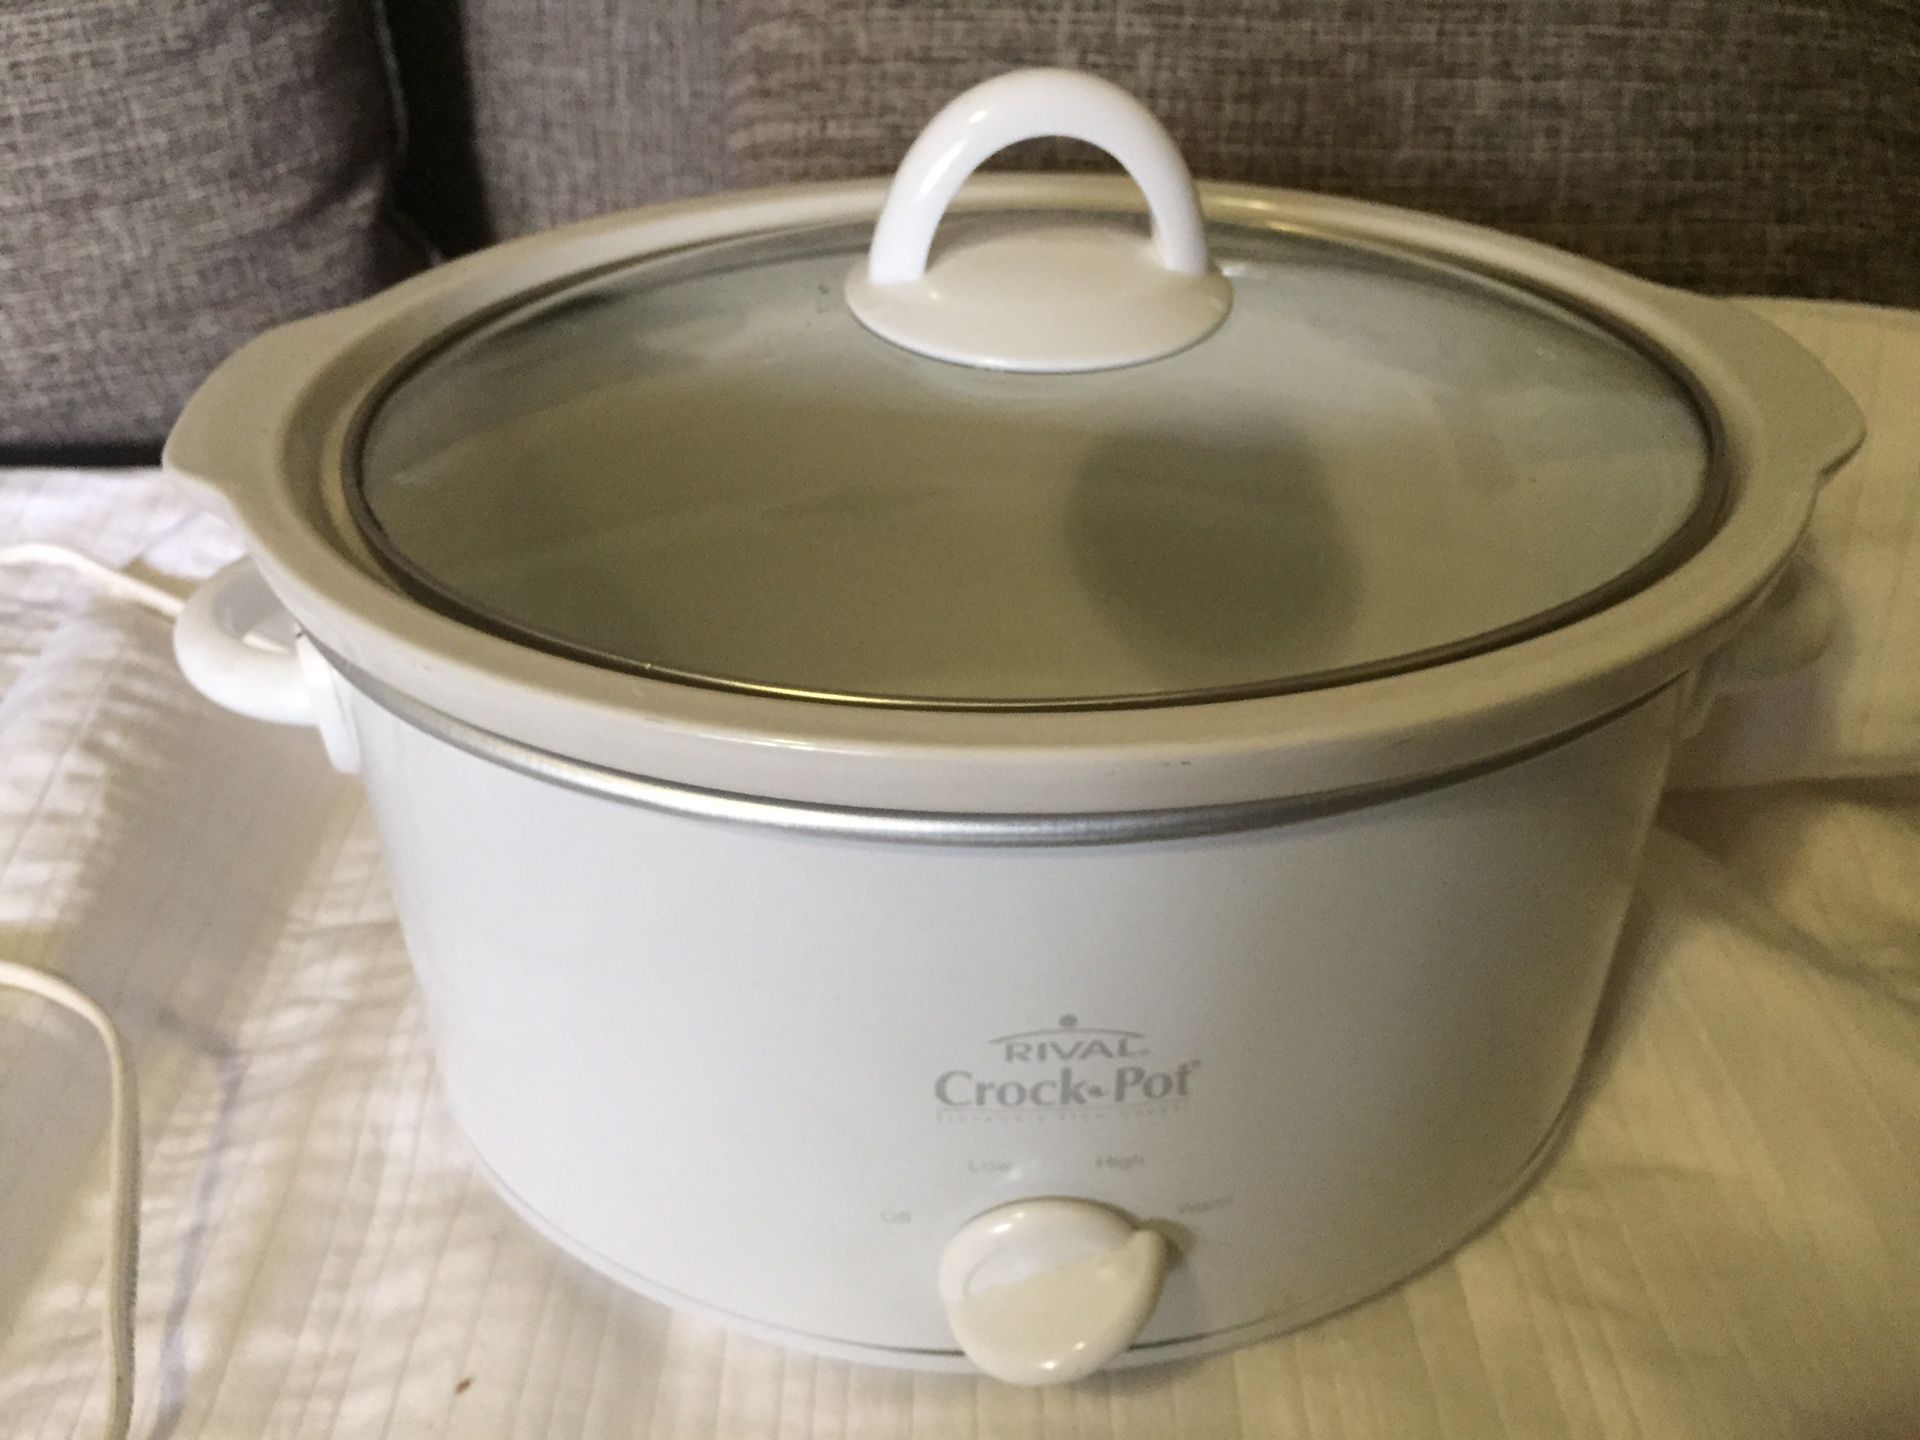 Crock pot 4 qt size slow cooker in like new condition